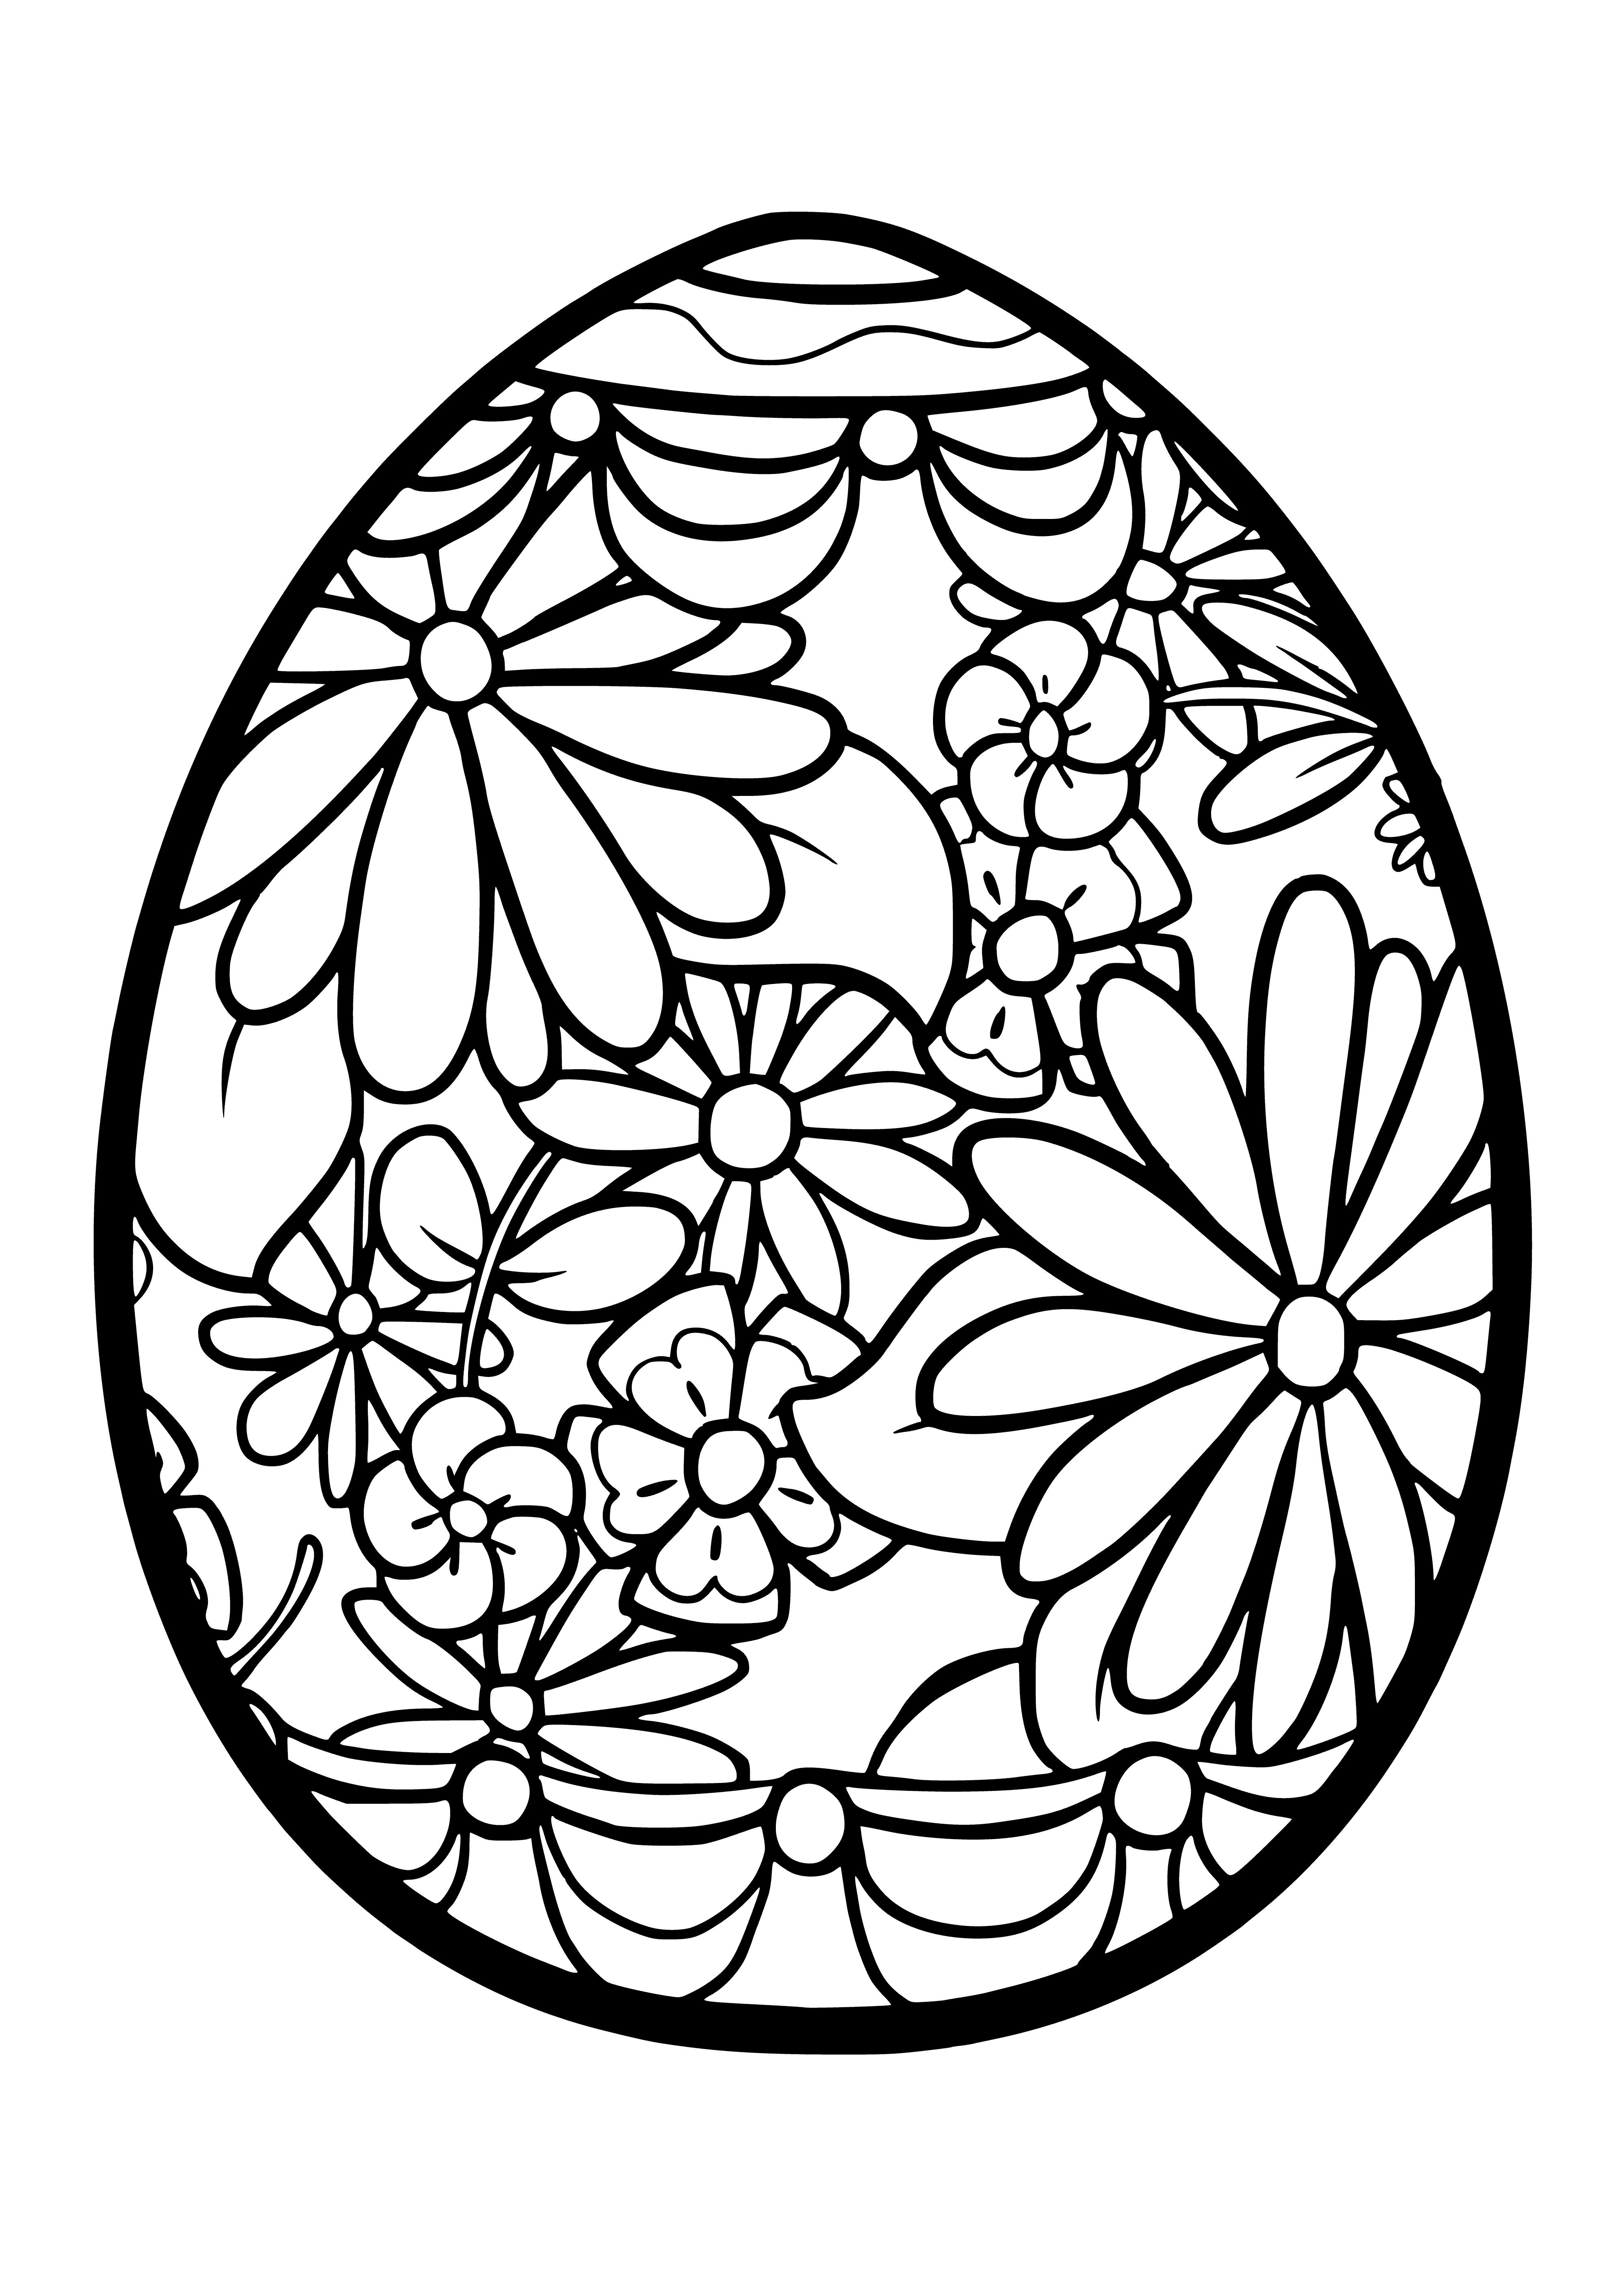 coloring page: 3 Easter eggs: 2 brown, 1 yellow, all with green stripes.